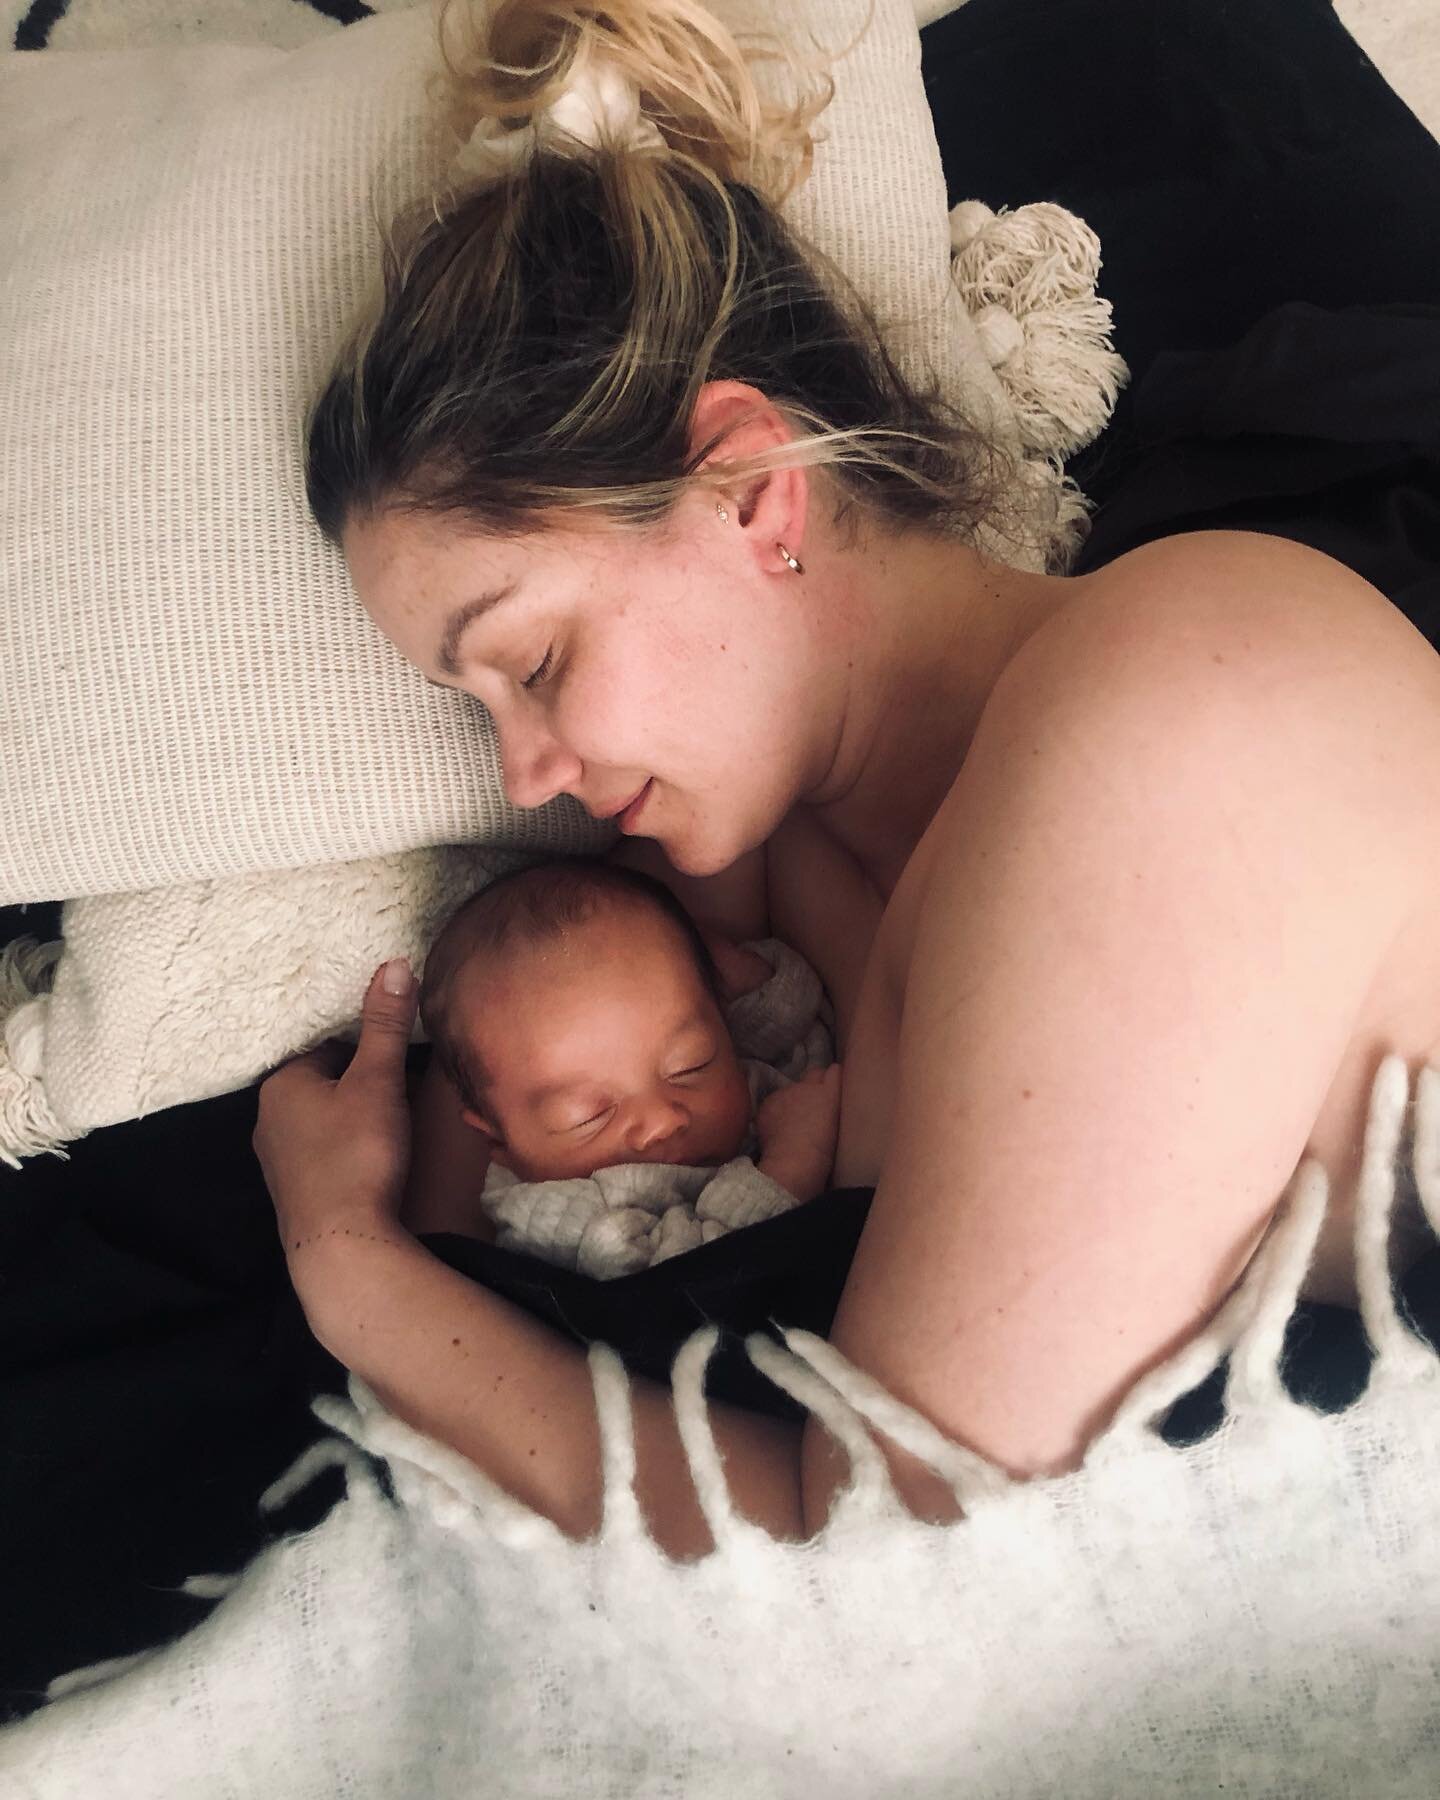 Receiving bodywork in early postpartum is about creating time and space to honour the very sacred transition into parenthood. Our bodies are changed, as we give birth we birth new selves, raw and vulnerable. To be witness and support with hands on he